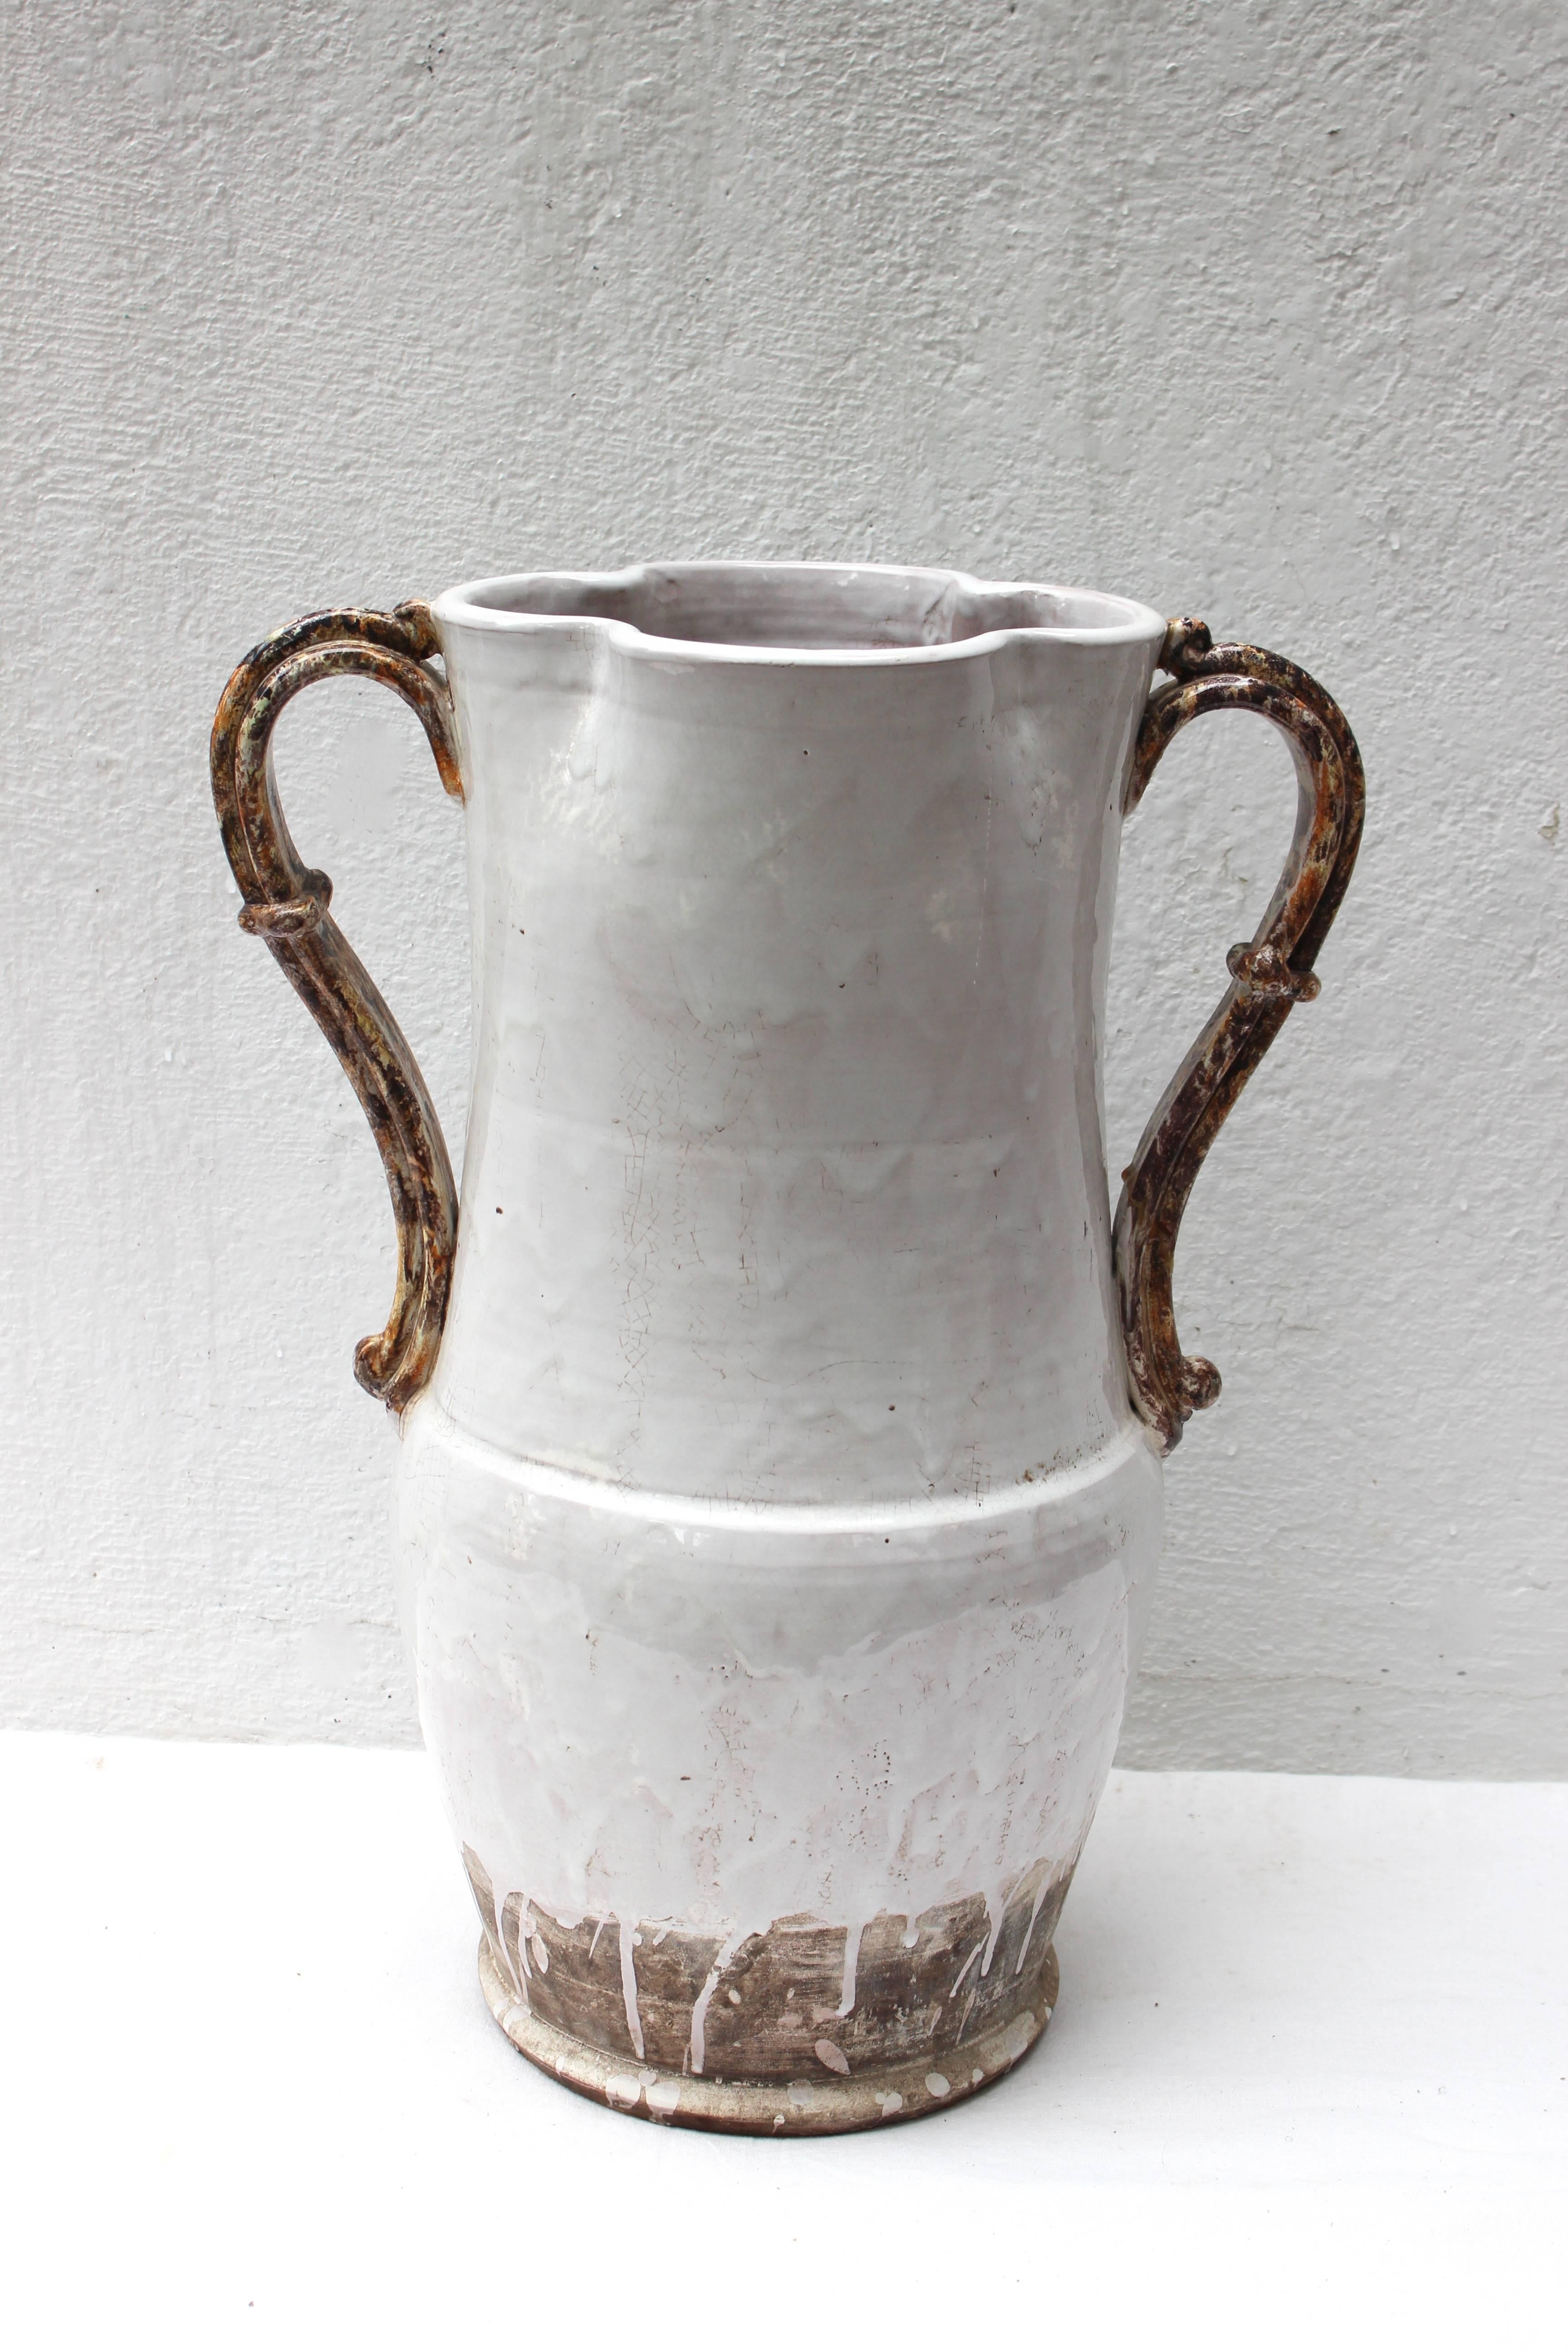 Wonderful looking large vase with handles and beautiful glaze, large enough for use as an umbrella stand.